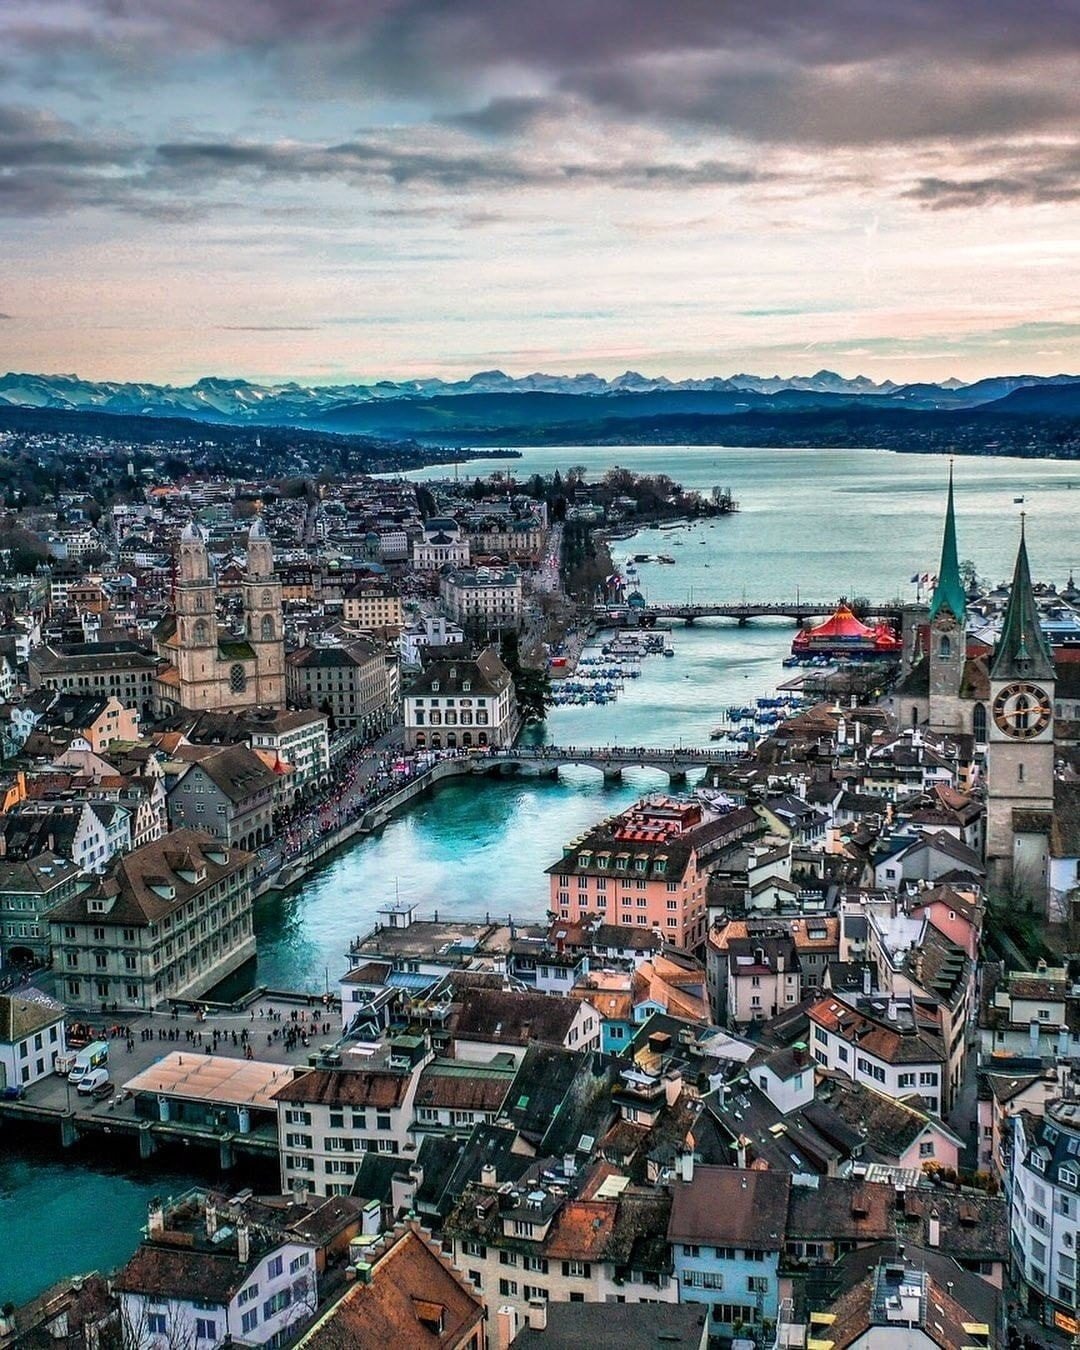 Old town of Zürich in Switzerland 🌄🇨🇭⁣⁣
⁣⁣⁣⁣
Tag #switzerland🇨🇭 Pictures get a chance to be featured by @switzerlandpictures ⠀⁣⁣⁣⁣⁣⁣⁣⁣⁣⁣⁣⁣⁣⁣⁣⁣⁣⁣⁣⁣⁣⁣⁣⁣⁣⁣⁣⁣⁣⁣⁣⁣⁣⁣⁣⁣⁣⁣⁣⁣⁣⁣⁣⁣⁣⁣⁣⁣⁣⁣⁣⁣⁣⁣⁣⁣⁣⁣⁣⁣⁣⁣⁣⁣⁣⁣⁣⁣⁣⁣⁣⁣⁣⁣⁣⁣⁣⁣⁣⁣⁣⁣⁣⁣⁣⁣⁣⁣⁣⁣⁣⁣⁣⁣⁣⁣⁣⁣⁣⁣⁣⁣⁣⁣⁣⁣⁣⁣⁣⁣⁣⁣⁣⁣⁣⁣⁣⁣⁣⁣⁣⁣⁣⁣⁣⁣⁣⁣⁣⁣⁣⁣⁣⁣⁣⁣⁣⁣⁣⁣⁣⁣⁣⁣⁣⁣⁣⁣⁣⁣⁣⁣⁣⁣⁣⁣⁣⁣⁣⁣⁣⁣⁣⁣⁣⁣⁣⁣⁣⁣⁣
⠀⁣⁣⁣⁣⁣⁣⁣⁣⁣⁣⁣⁣⁣⁣⁣⁣⁣⁣⁣⁣⁣⁣⁣⁣⁣⁣⁣⁣⁣⁣⁣⁣⁣⁣⁣⁣⁣⁣⁣⁣⁣⁣⁣⁣⁣⁣⁣⁣⁣⁣⁣⁣⁣⁣⁣⁣⁣⁣⁣⁣⁣⁣⁣⁣⁣⁣⁣⁣⁣⁣⁣⁣⁣⁣⁣⁣⁣⁣⁣⁣⁣⁣⁣⁣⁣⁣⁣⁣⁣⁣⁣⁣⁣⁣⁣⁣⁣⁣⁣⁣⁣⁣⁣⁣⁣⁣⁣⁣⁣⁣⁣⁣⁣⁣⁣⁣⁣⁣⁣⁣⁣⁣⁣⁣⁣⁣⁣⁣⁣⁣⁣⁣⁣⁣⁣⁣⁣⁣⁣⁣⁣⁣⁣⁣⁣⁣⁣⁣⁣⁣⁣⁣⁣⁣⁣⁣⁣⁣⁣⁣⁣⁣⁣⁣⁣⁣⁣⁣⁣⁣⁣⁣⁣⁣⁣⁣
#switzerlandpictures #switzerland #schweiz #switzerlandnature #exploreswitzerland #iloveswitzerland #amazingswitzerland #switzerland🇨🇭 #switzerlandvacations ⁣⁣⁣ ⁣⁣⁣⁣⁣⁣⁣⁣⁣⁣⁣⁣⁣⁣⁣⁣⁣⁣⁣⁣⁣⁣⁣⁣⁣⁣⁣⁣⁣⁣⁣⁣⁣⁣⁣⁣⁣⁣⁣⁣⁣⁣⁣⁣⁣⁣⁣⁣⁣⁣⁣⁣⁣⁣⁣⁣⁣⁣⁣⁣⁣⁣⁣⁣⁣⁣⁣⁣⁣⁣⁣⁣⁣⁣⁣⁣⁣⁣⁣⁣⁣⁣⁣⁣⁣⁣⁣⁣⁣⁣⁣⁣⁣⁣⁣⁣⁣⁣⁣⁣⁣⁣⁣⁣⁣⁣⁣⁣⁣⁣⁣⁣⁣⁣⁣⁣⁣⁣⁣⁣⁣⁣⁣⁣⁣⁣⁣⁣⁣⁣⁣⁣⁣⁣⁣⁣⁣⁣⁣⁣⁣⁣⁣⁣⁣⁣
⁣⁣⁣⁣⁣⁣⁣⁣⁣⁣⁣⁣⁣⁣⁣⁣⁣⁣⁣⁣⁣⁣⁣⁣⁣⁣⁣⁣⁣⁣⁣⁣⁣⁣⁣⁣⁣⁣⁣⁣⁣⁣⁣⁣⁣⁣⁣⁣⁣⁣⁣⁣⁣⁣⁣⁣⁣⁣⁣⁣⁣⁣⁣⁣⁣⁣⁣⁣⁣⁣⁣⁣⁣⁣⁣⁣⁣⁣⁣⁣⁣⁣⁣⁣⁣⁣⁣⁣⁣
📸 @world_walkerz